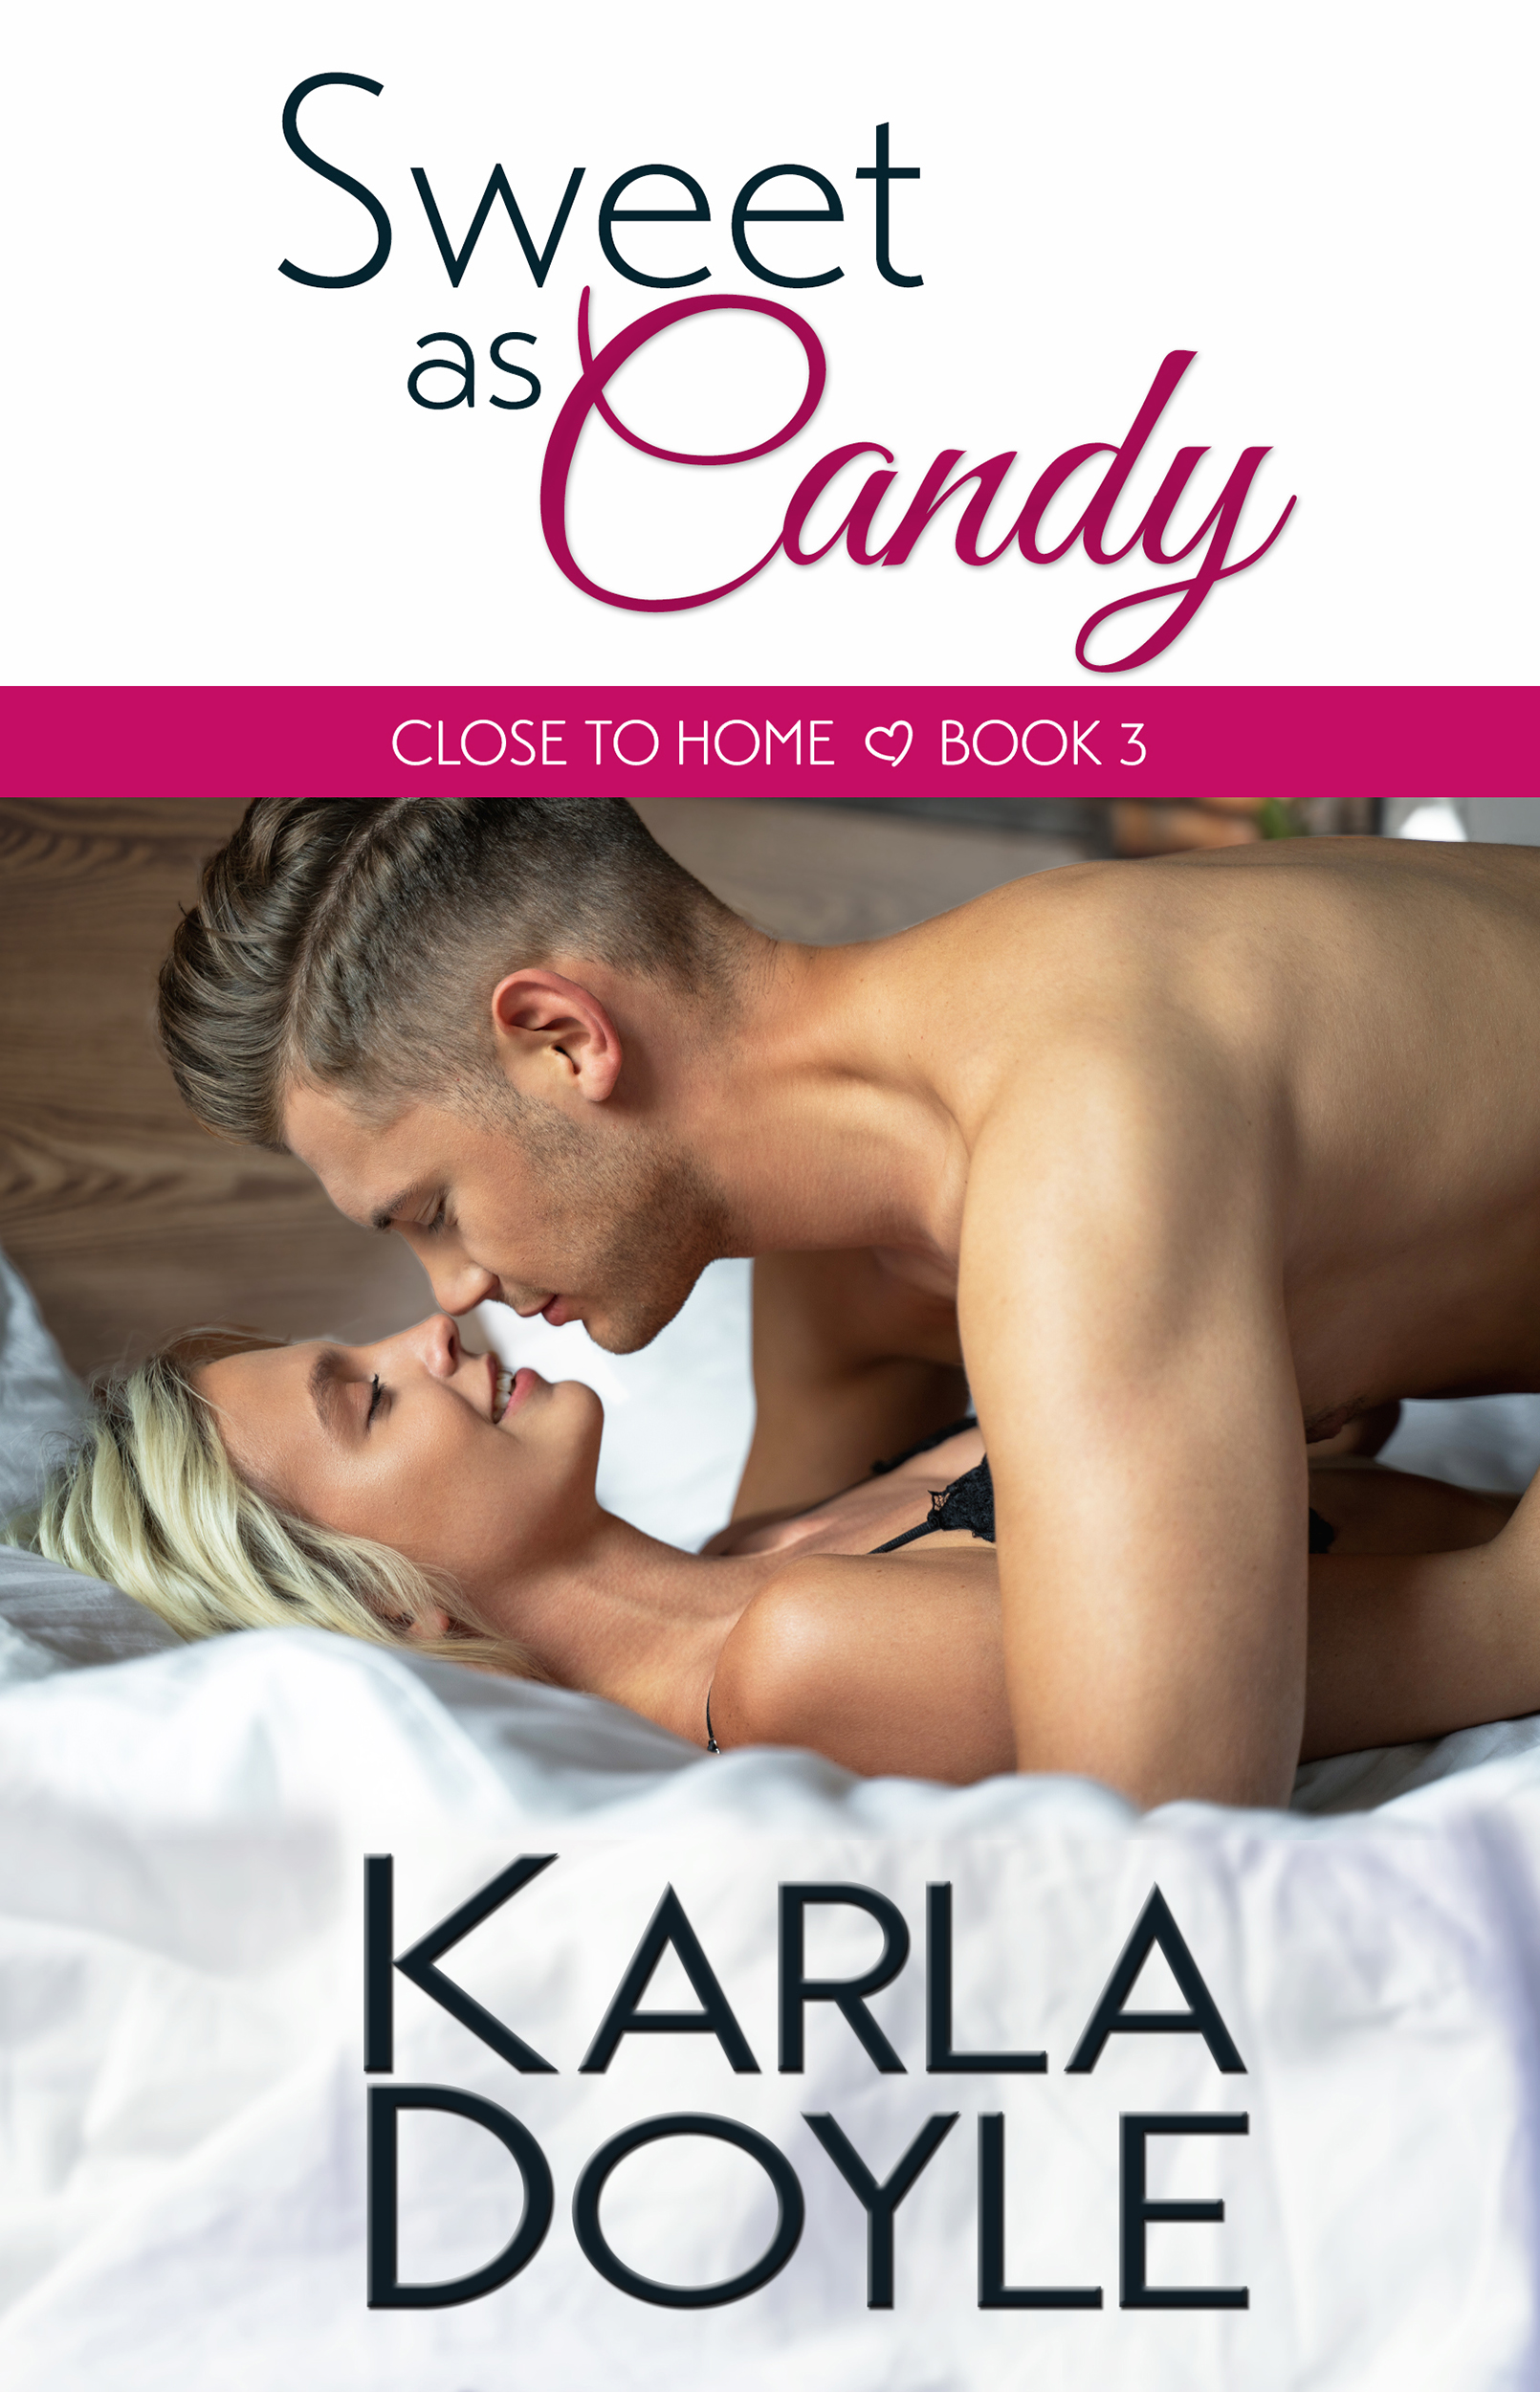 Sweet as Candy by Karla Doyle